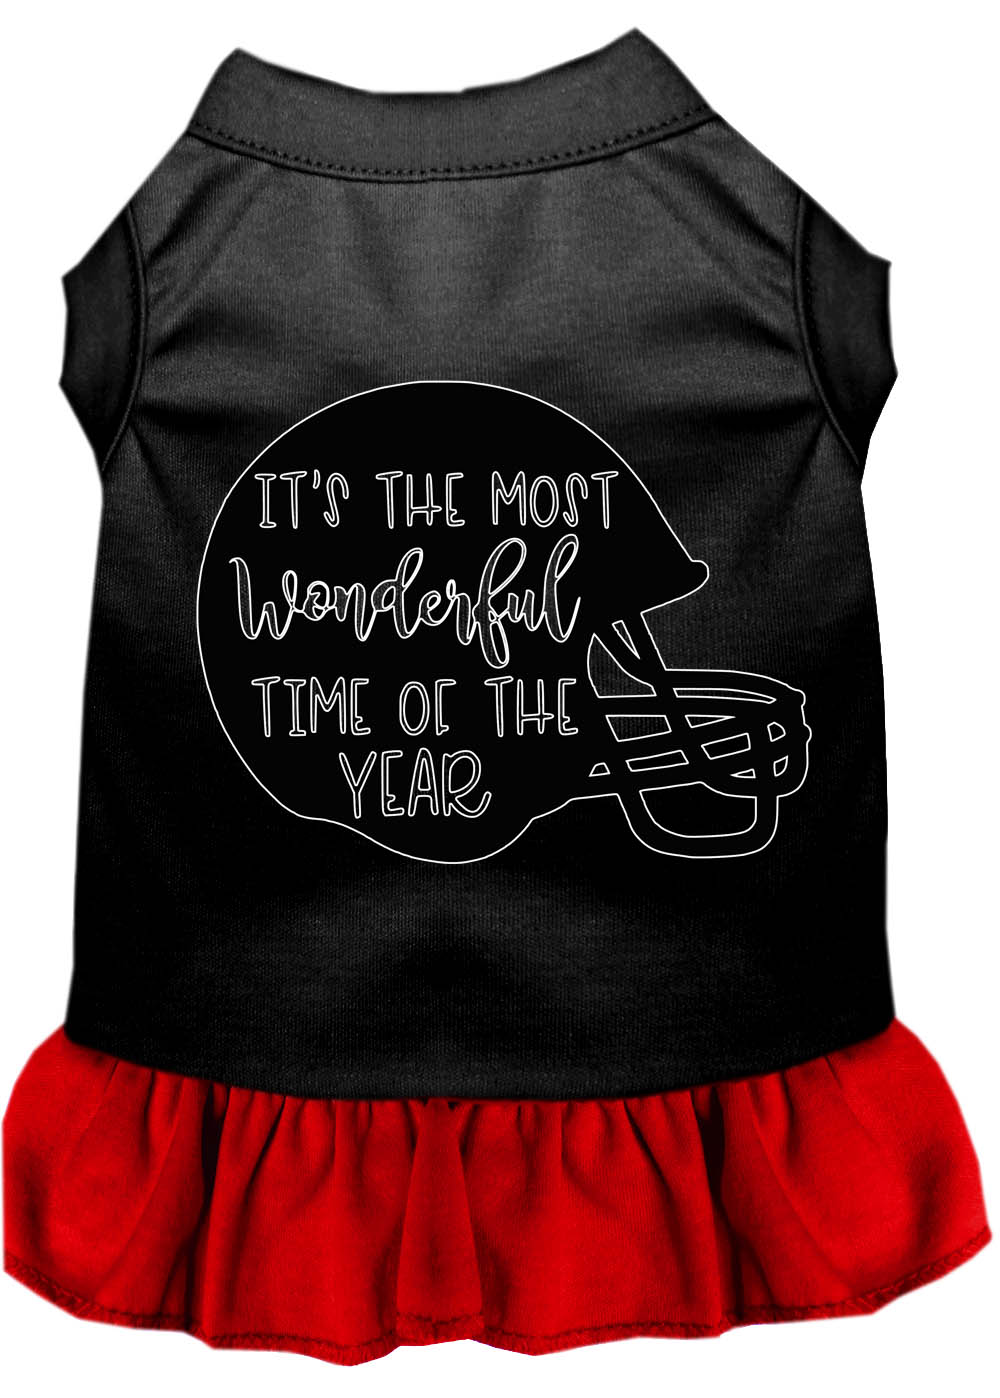 Most Wonderful Time of the Year (Football) Screen Print Dog Dress Black with Red Lg